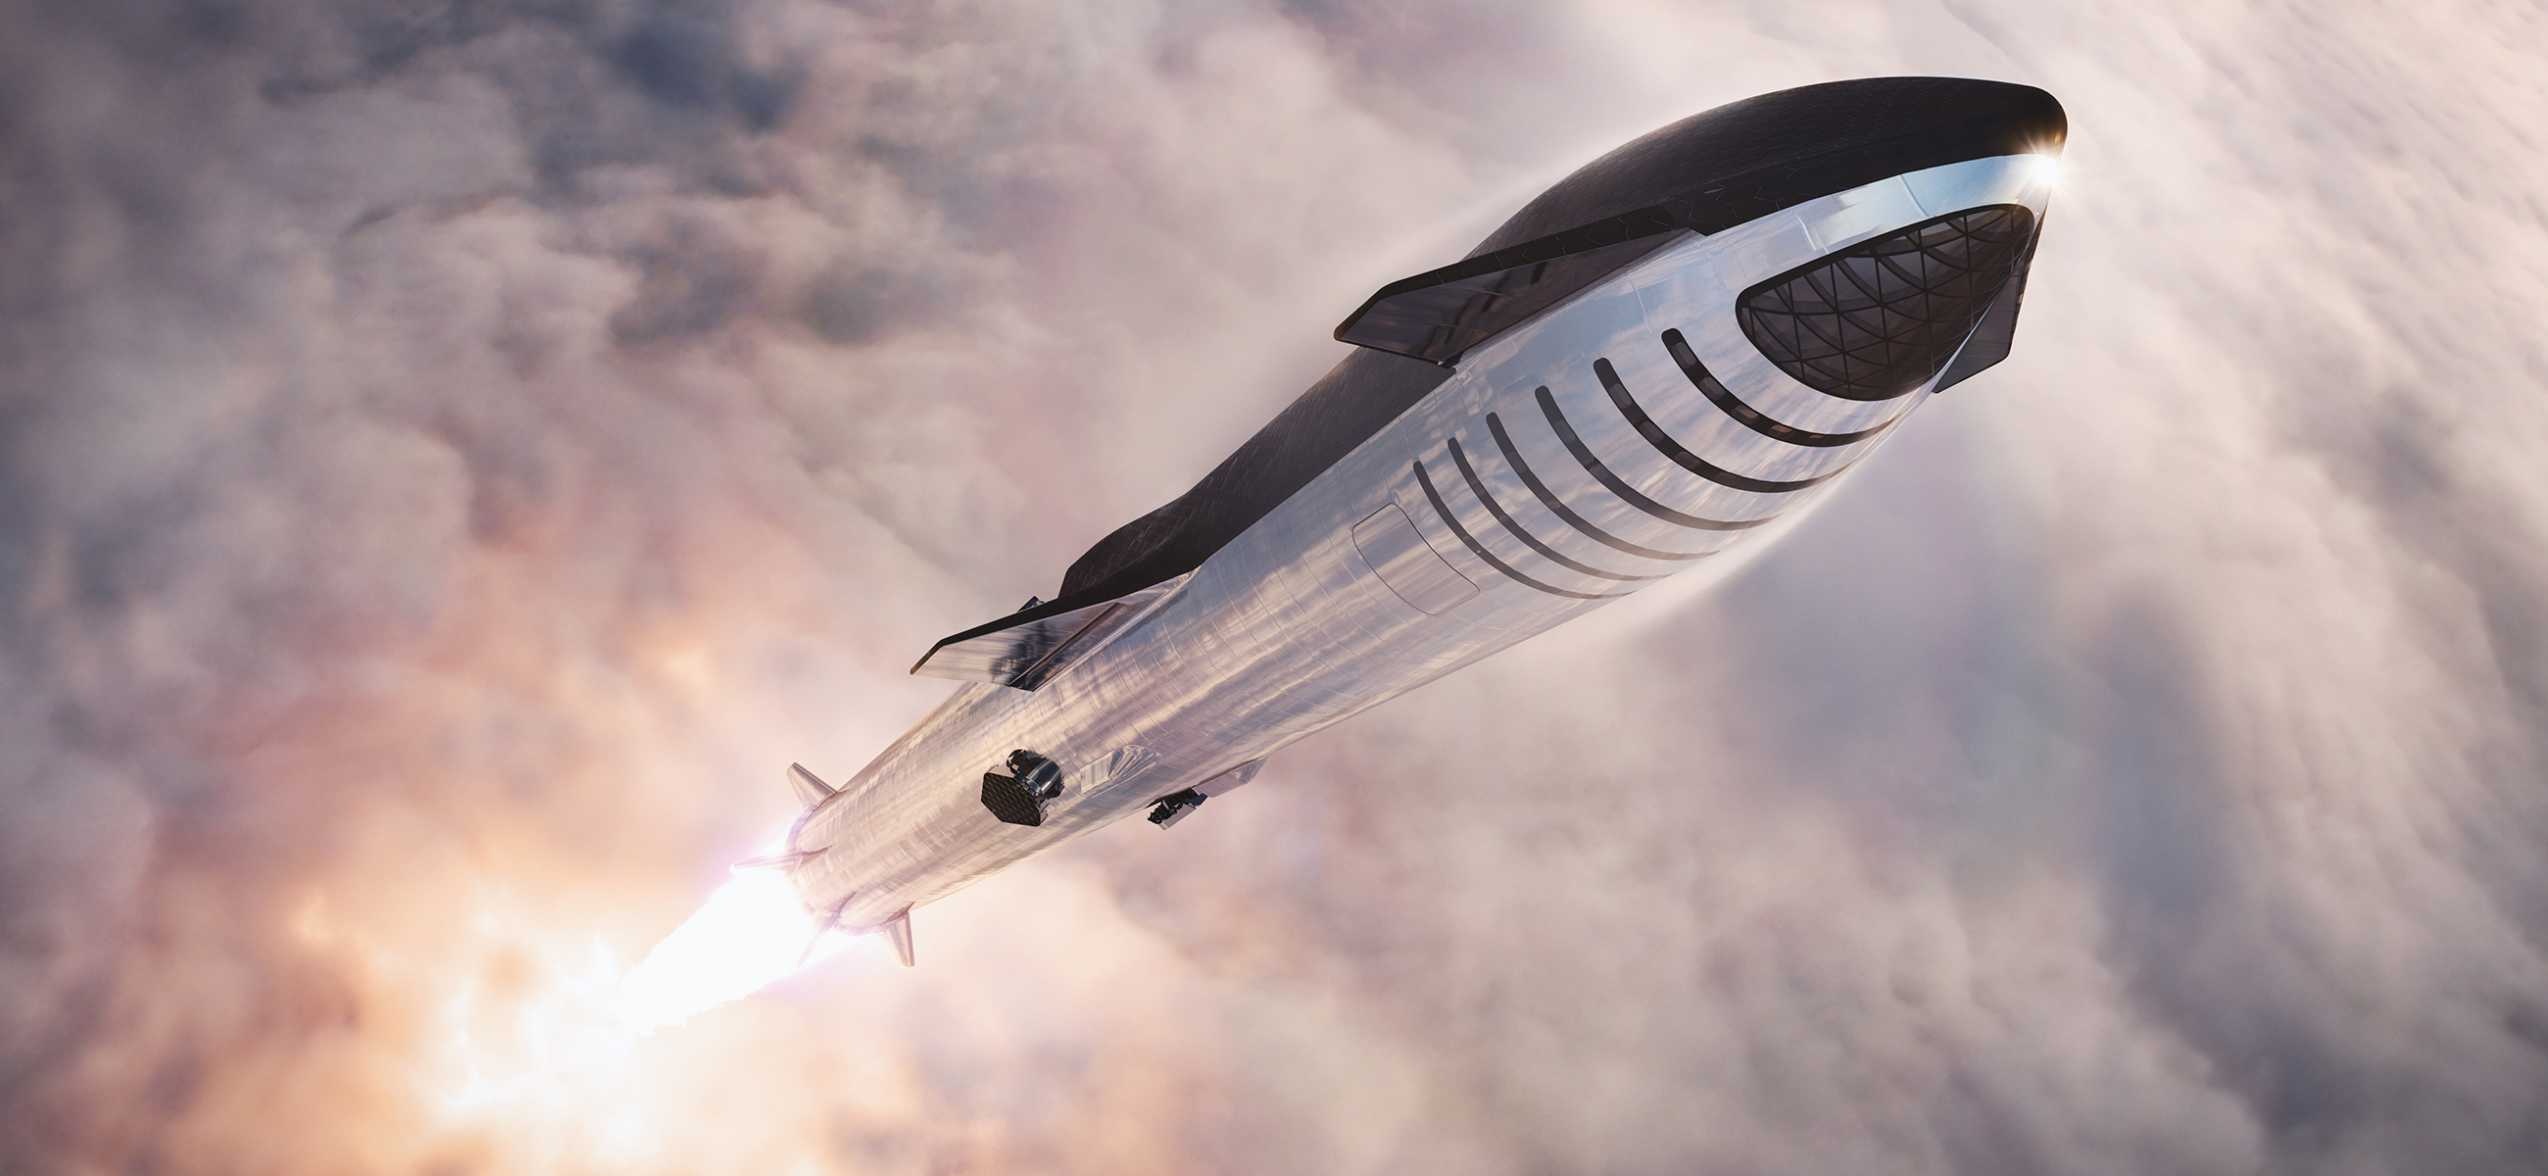 Starship: SpaceX, SN5 built with no flaps or nose cone, giving it a cylindrical shape. 2550x1180 Dual Screen Wallpaper.